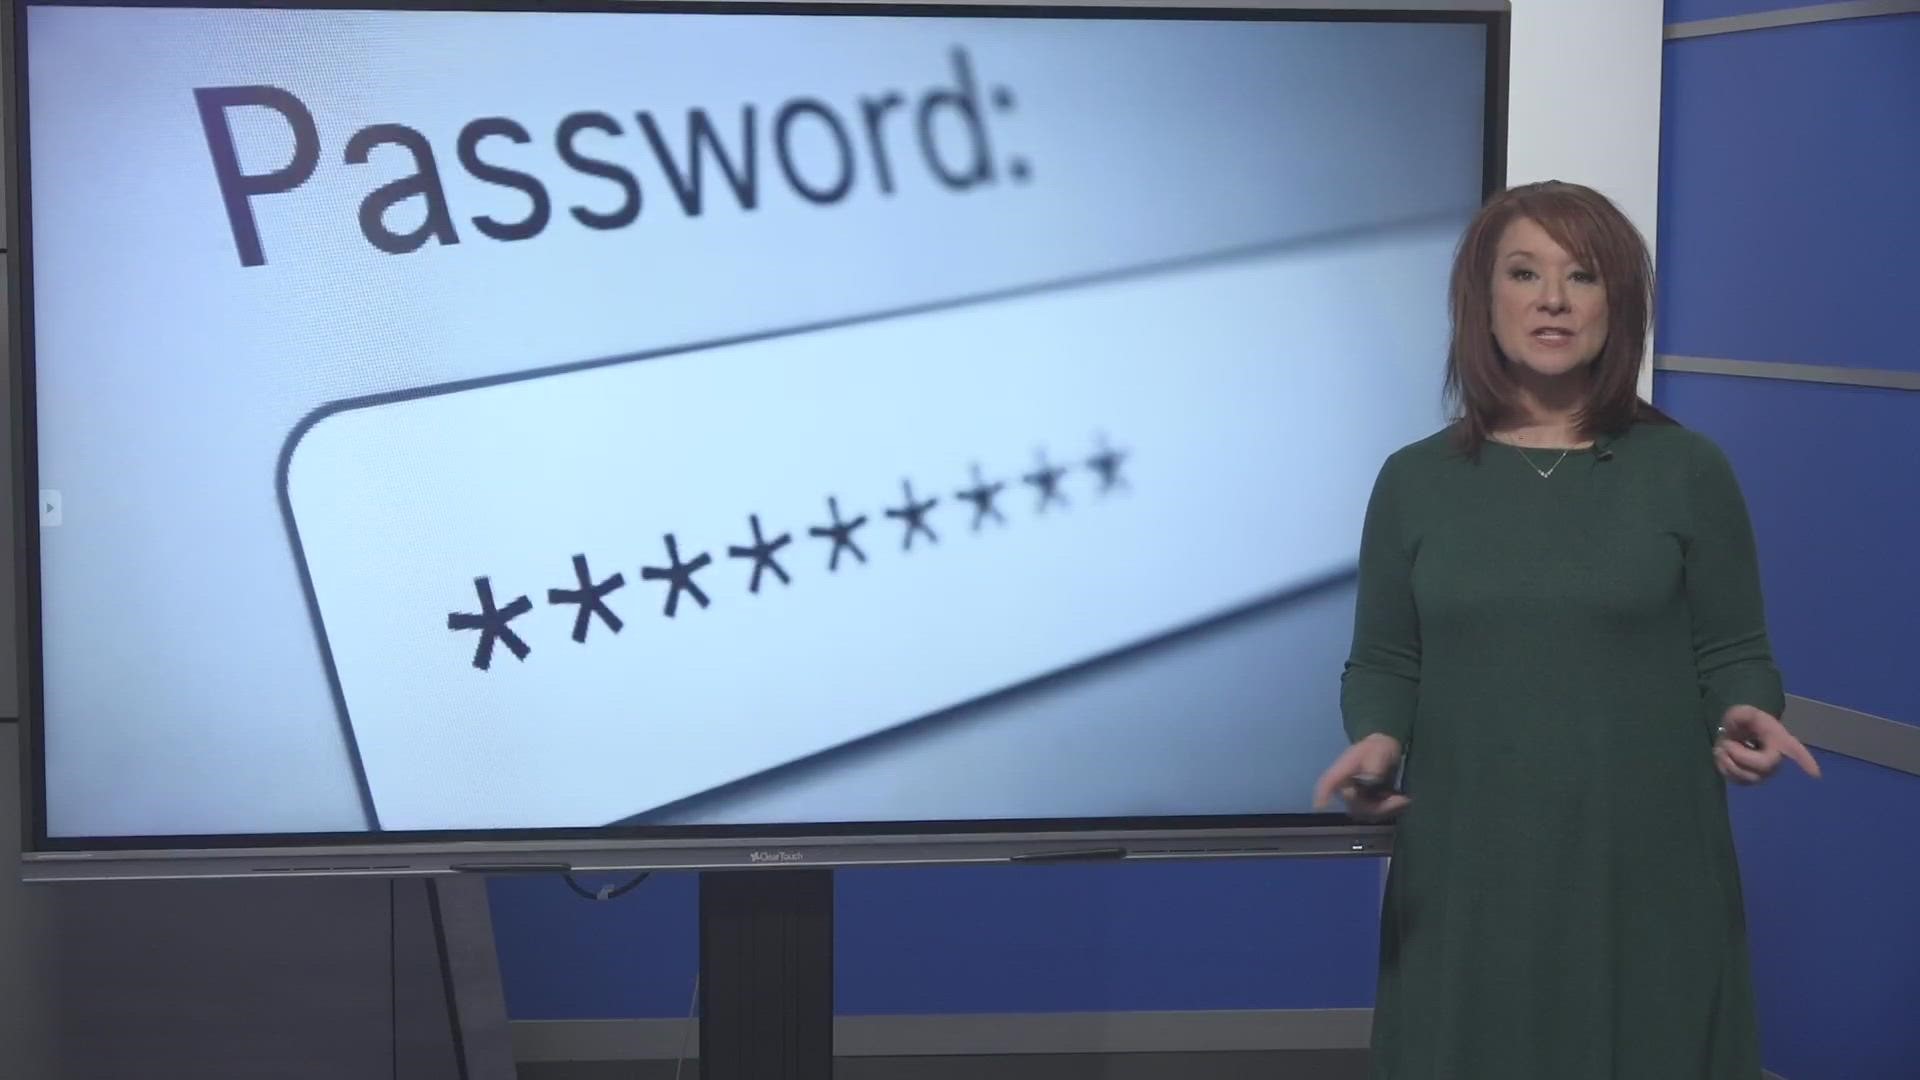 Are you capitalizing the first letter in your password?  You're doing it the wrong way!  2 wants to know life hackers share data privacy.